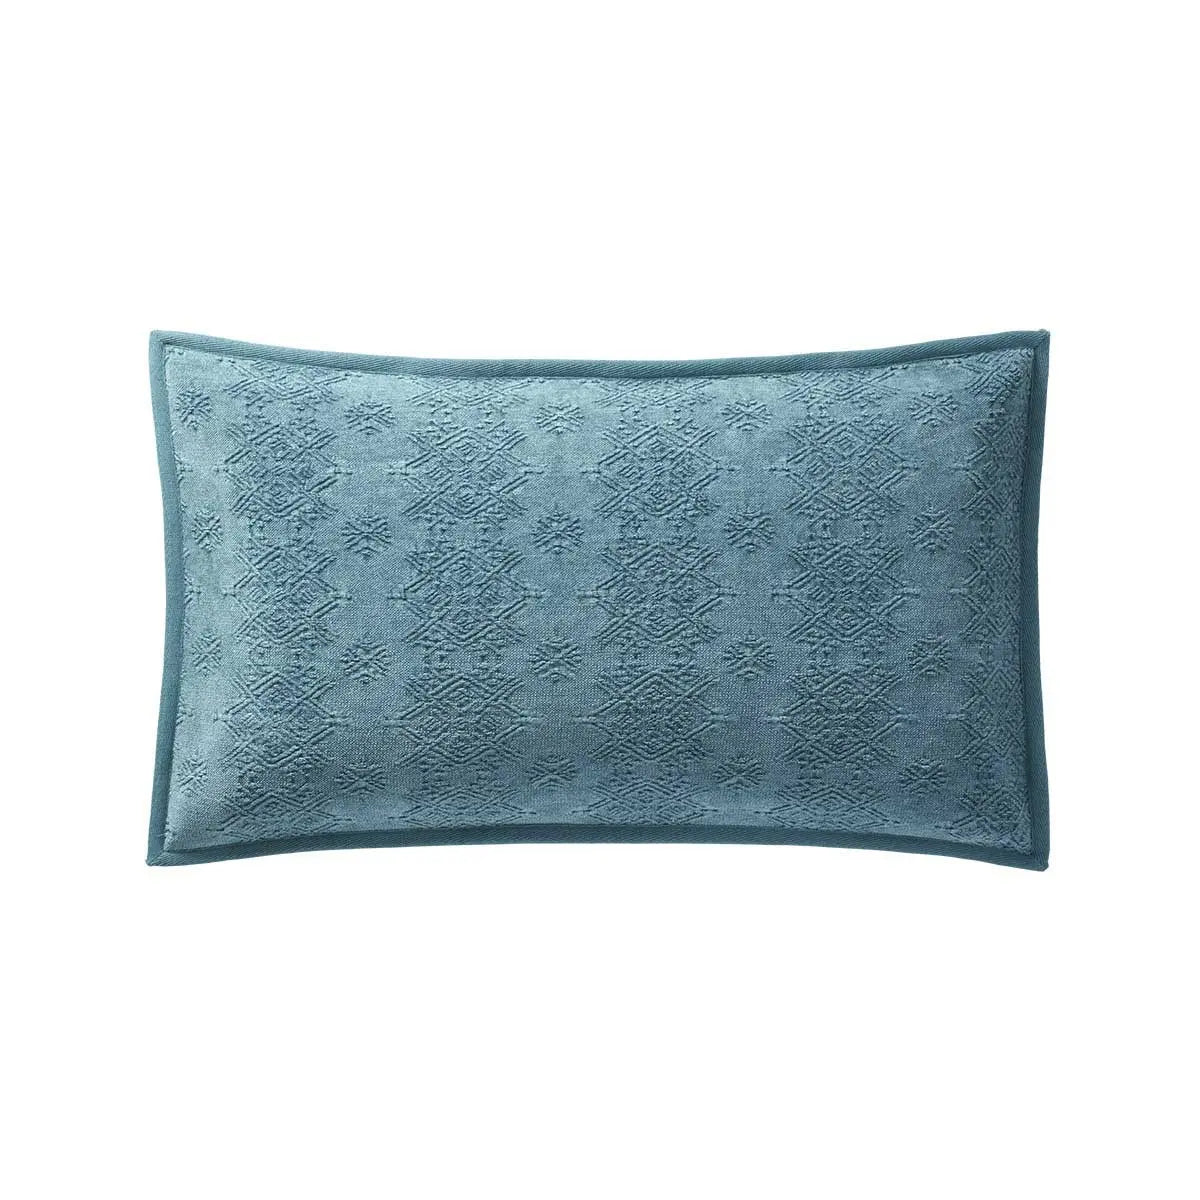 Yves Delorme Syracuse 13x22 Decorative Pillow - Turquoise